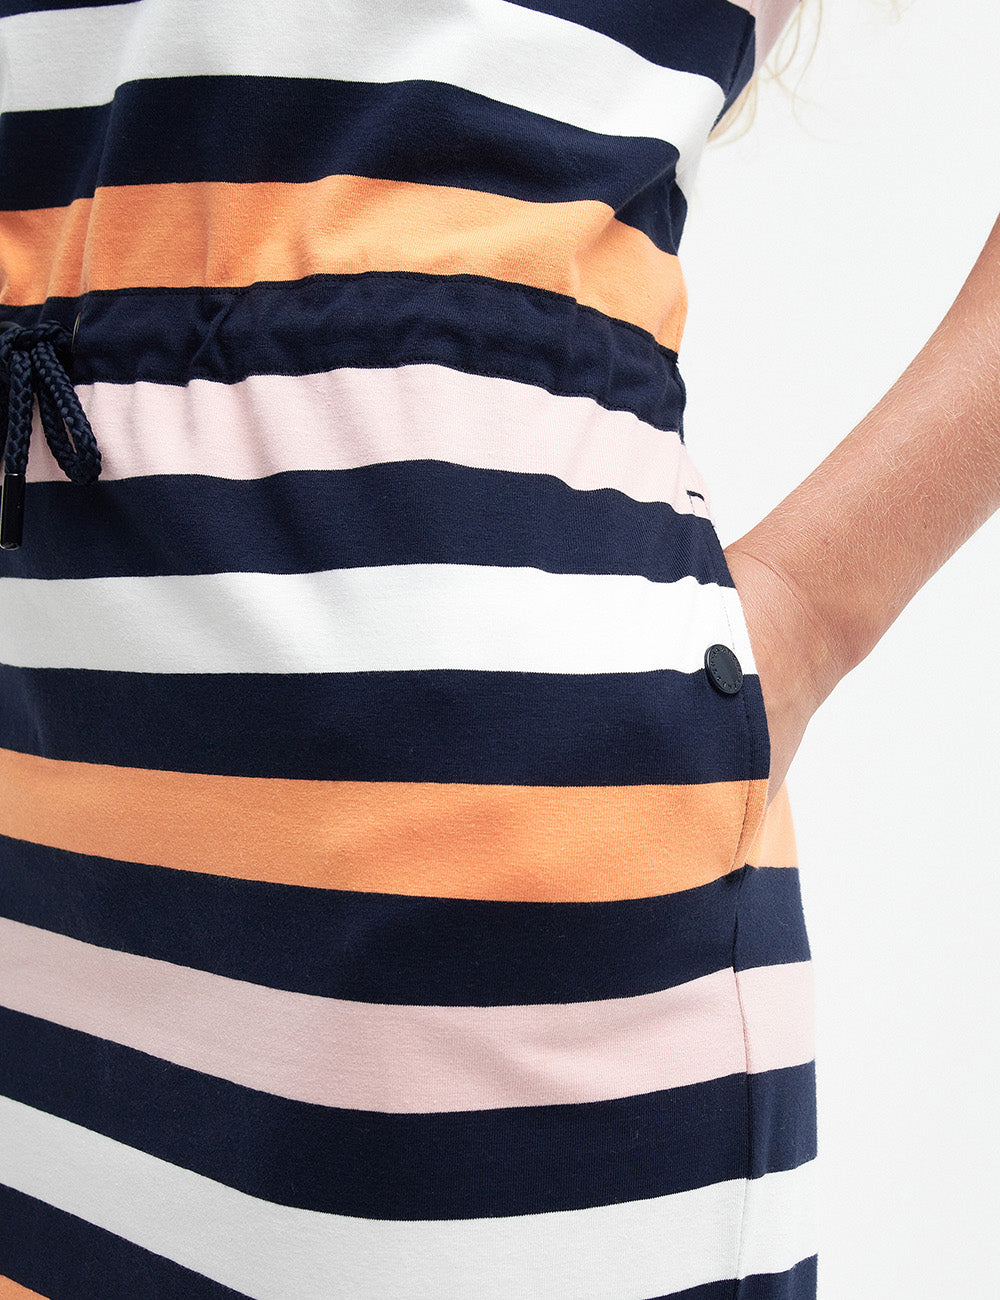 Barbour Marloes Stripe Dress - Navy/Apricot Crush